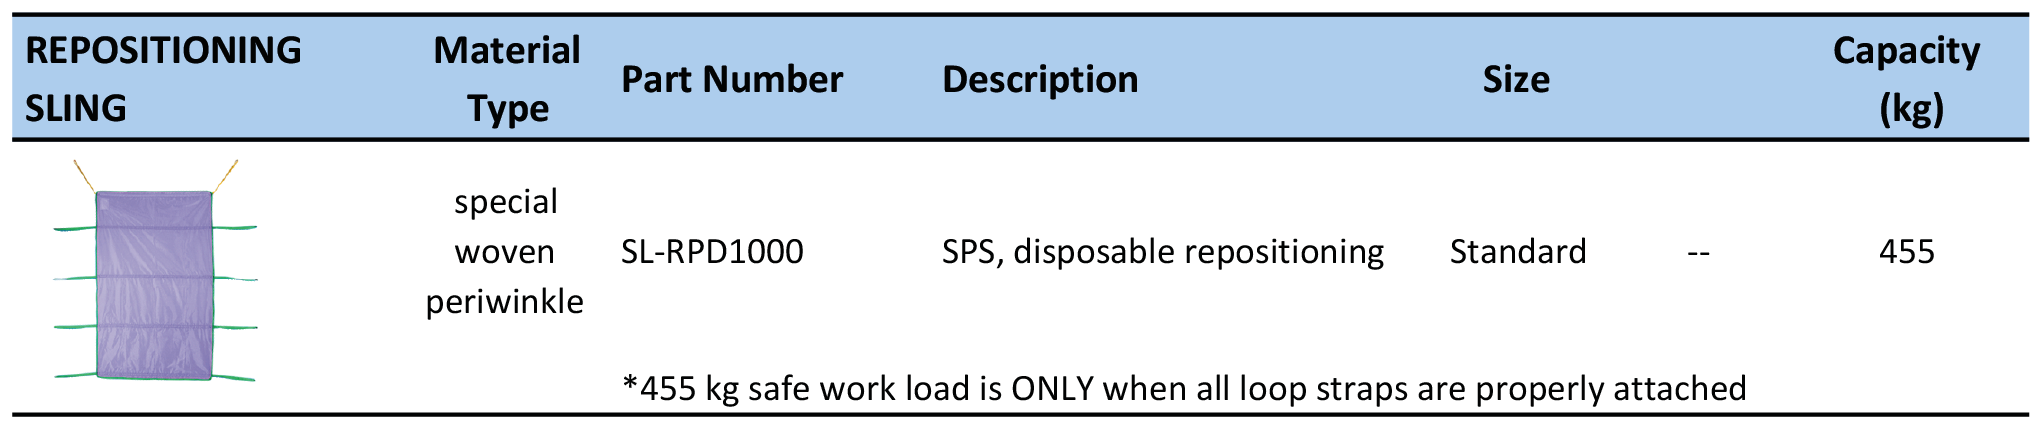 sling-reposition-20200522.png